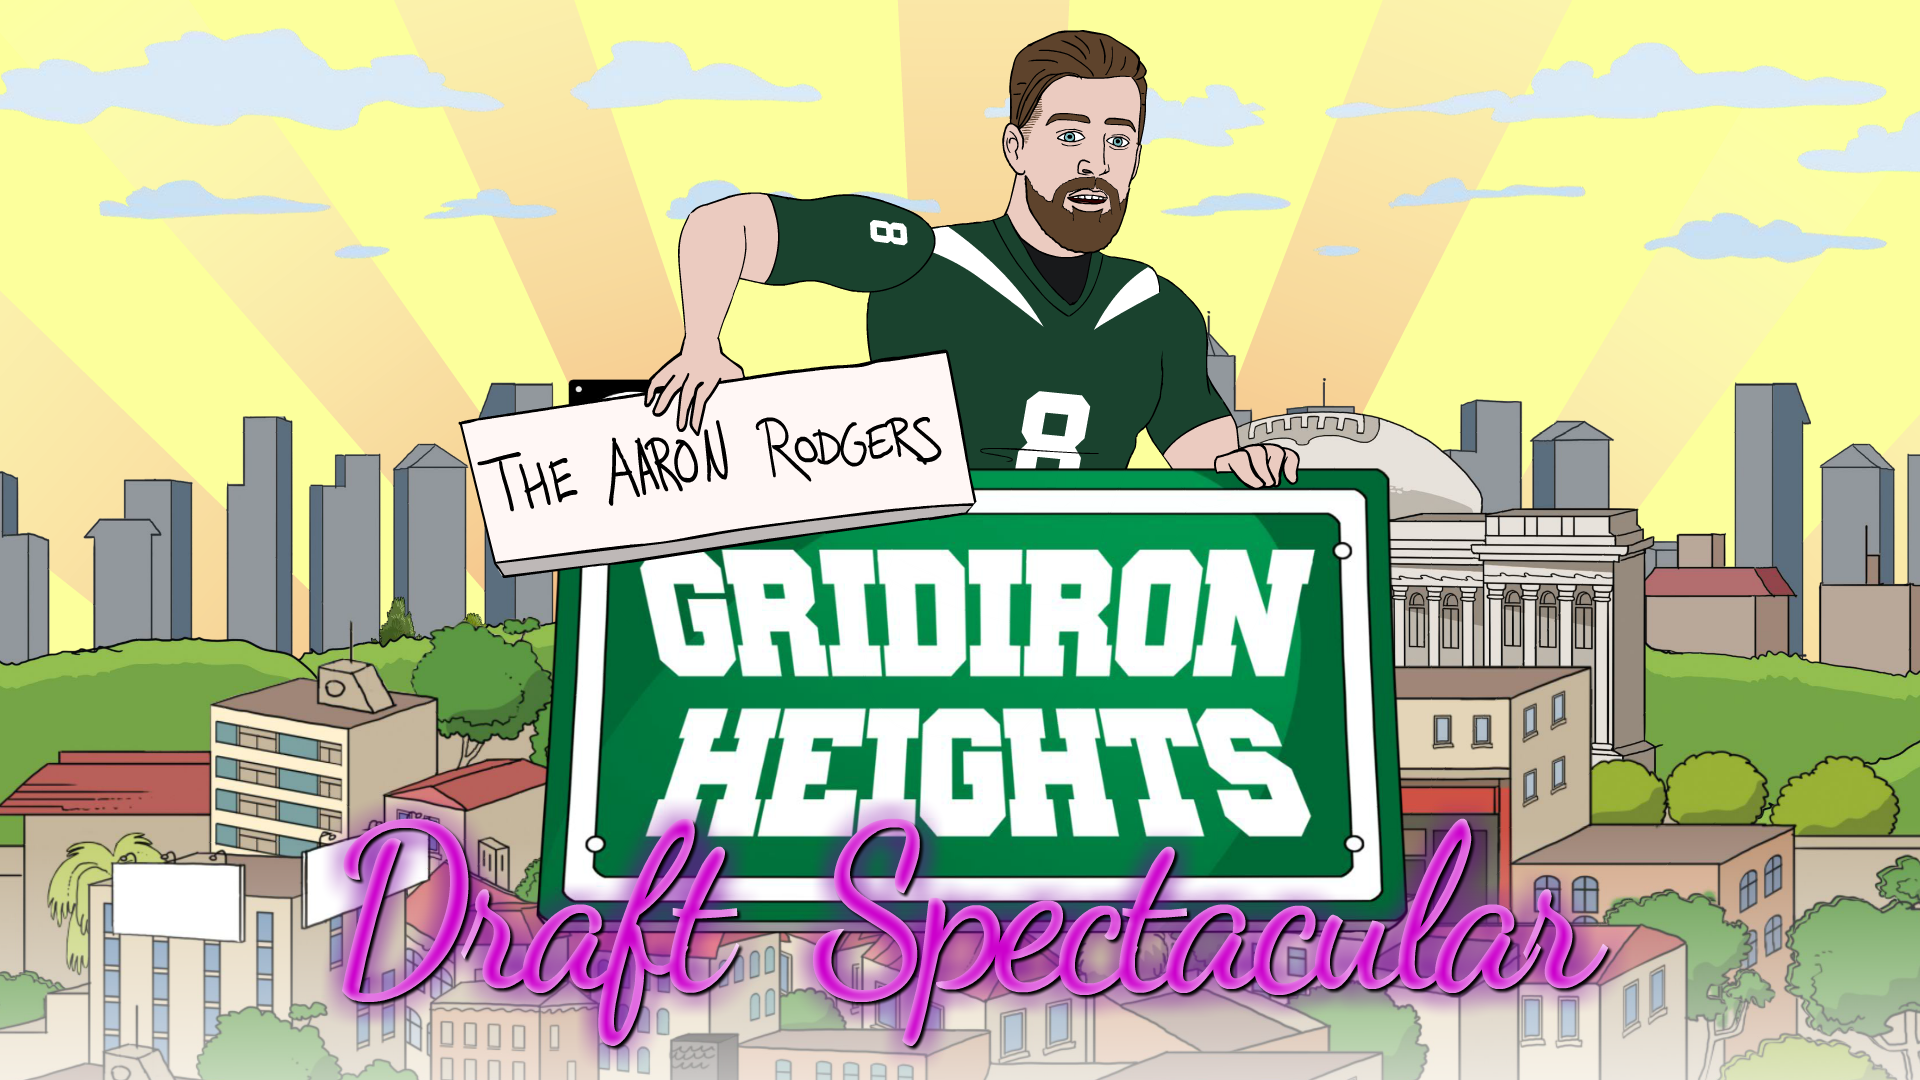 Gridiron Heights Explains Rodgers Trade 😂